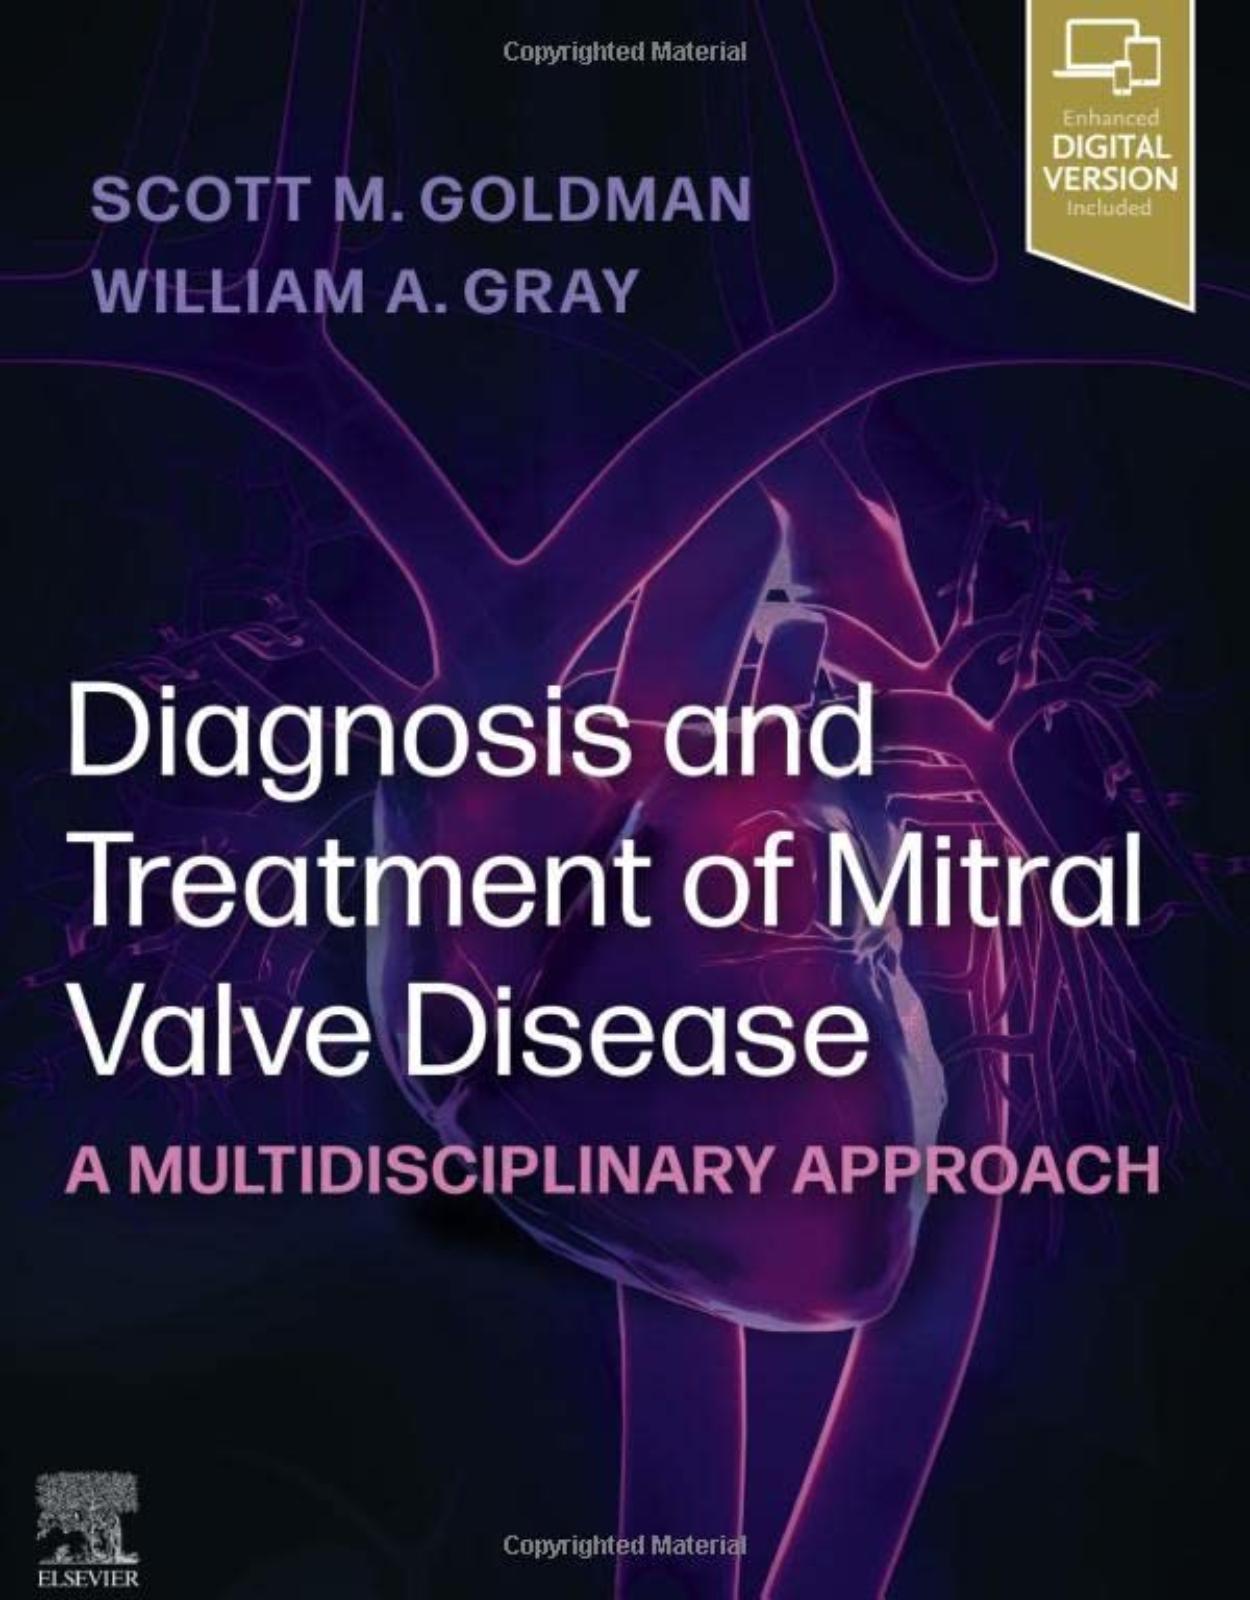 Diagnosis and Treatment of Mitral Valve Disease: A Multidisciplinary Approach 